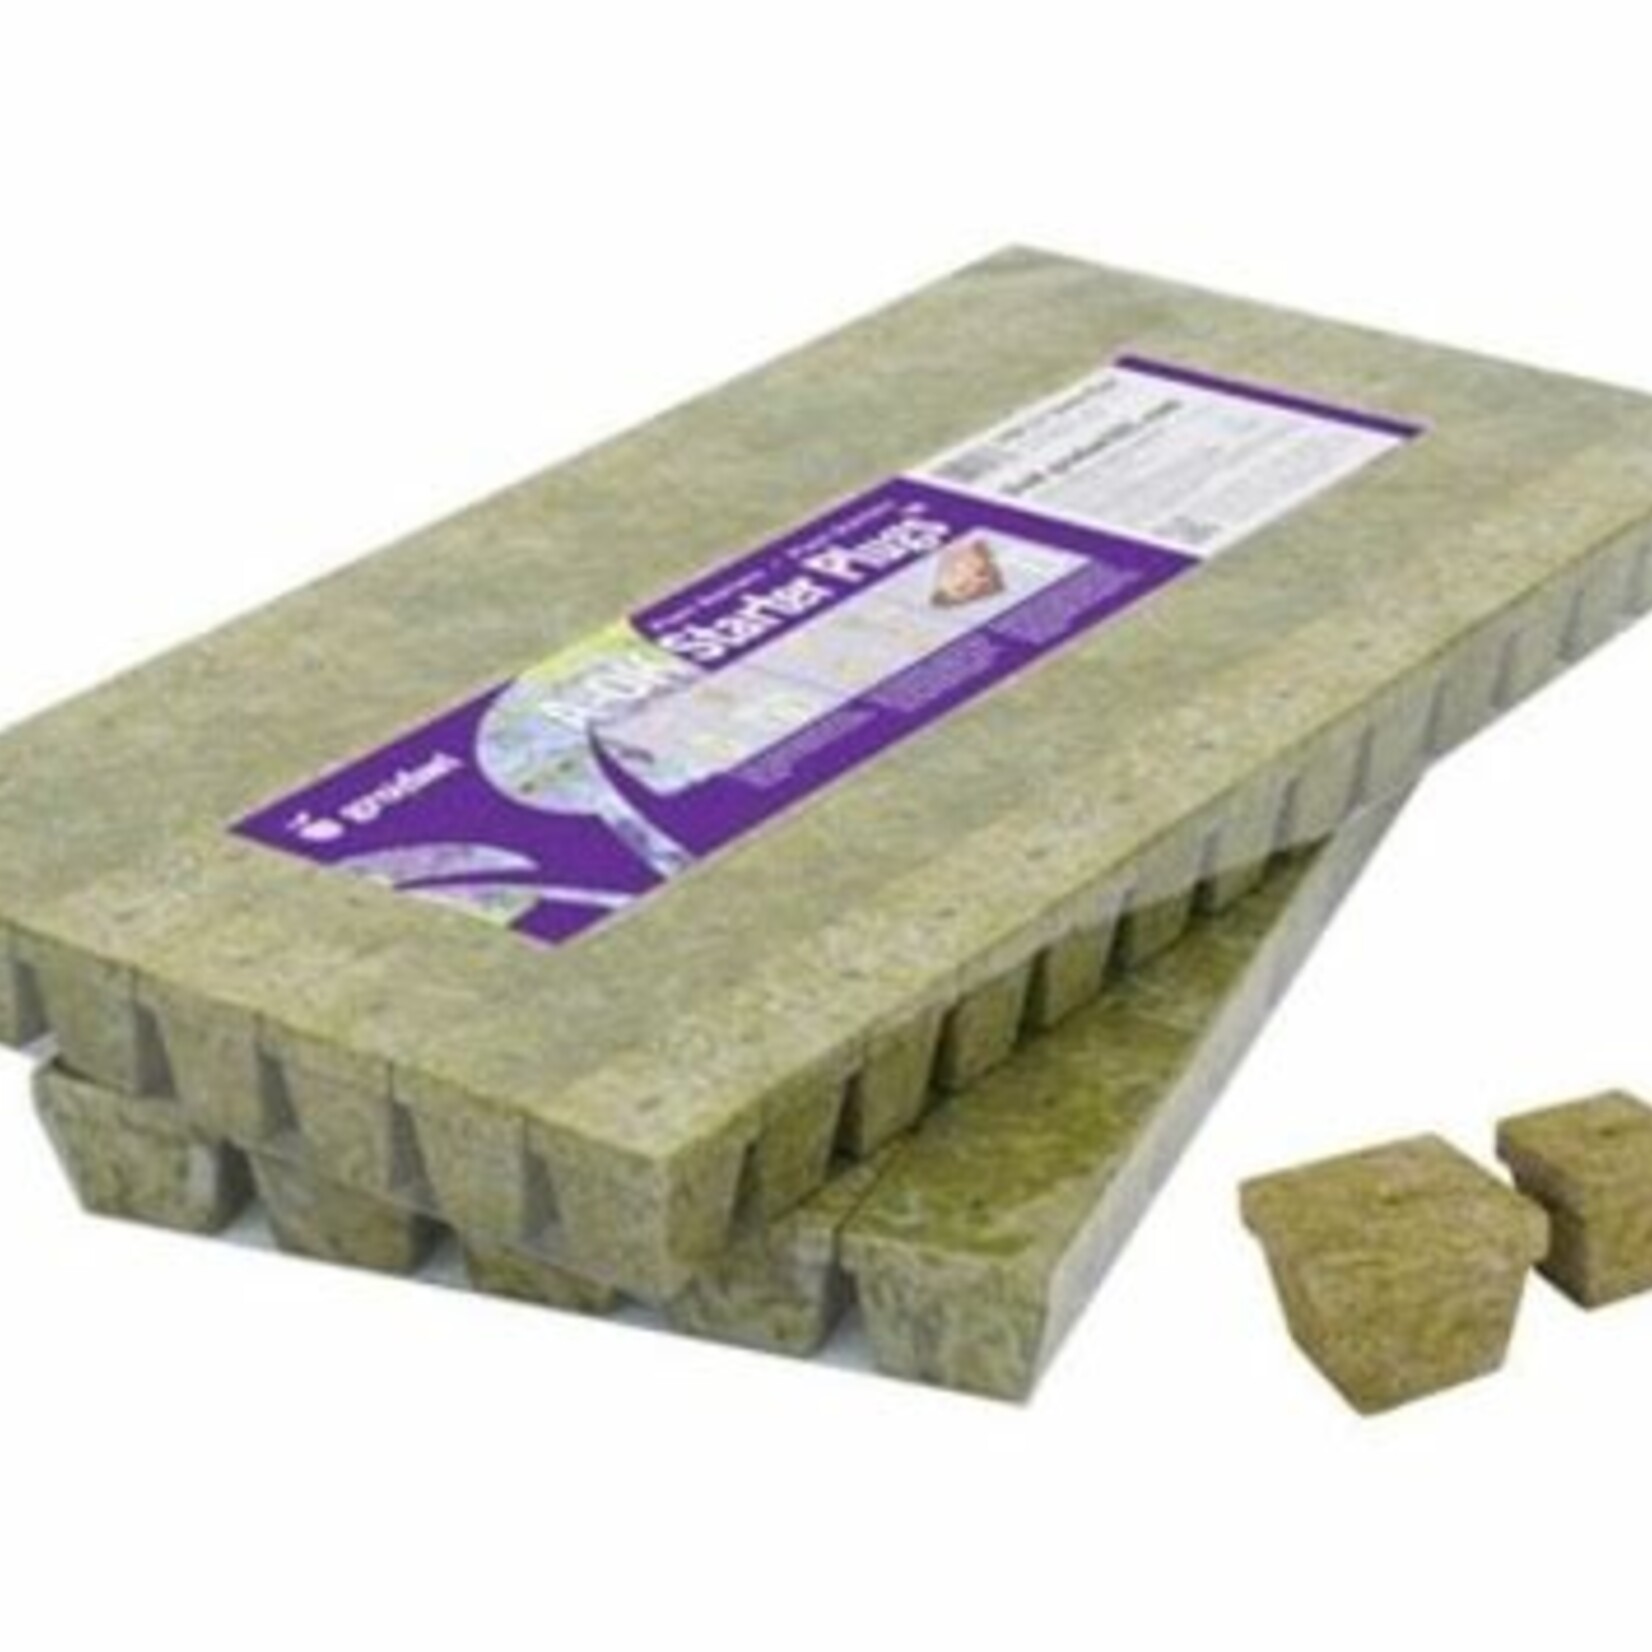 Rockwool Grow Cubes 1.5 Inches - Growing Medium Starter Sheets 30 per Pack